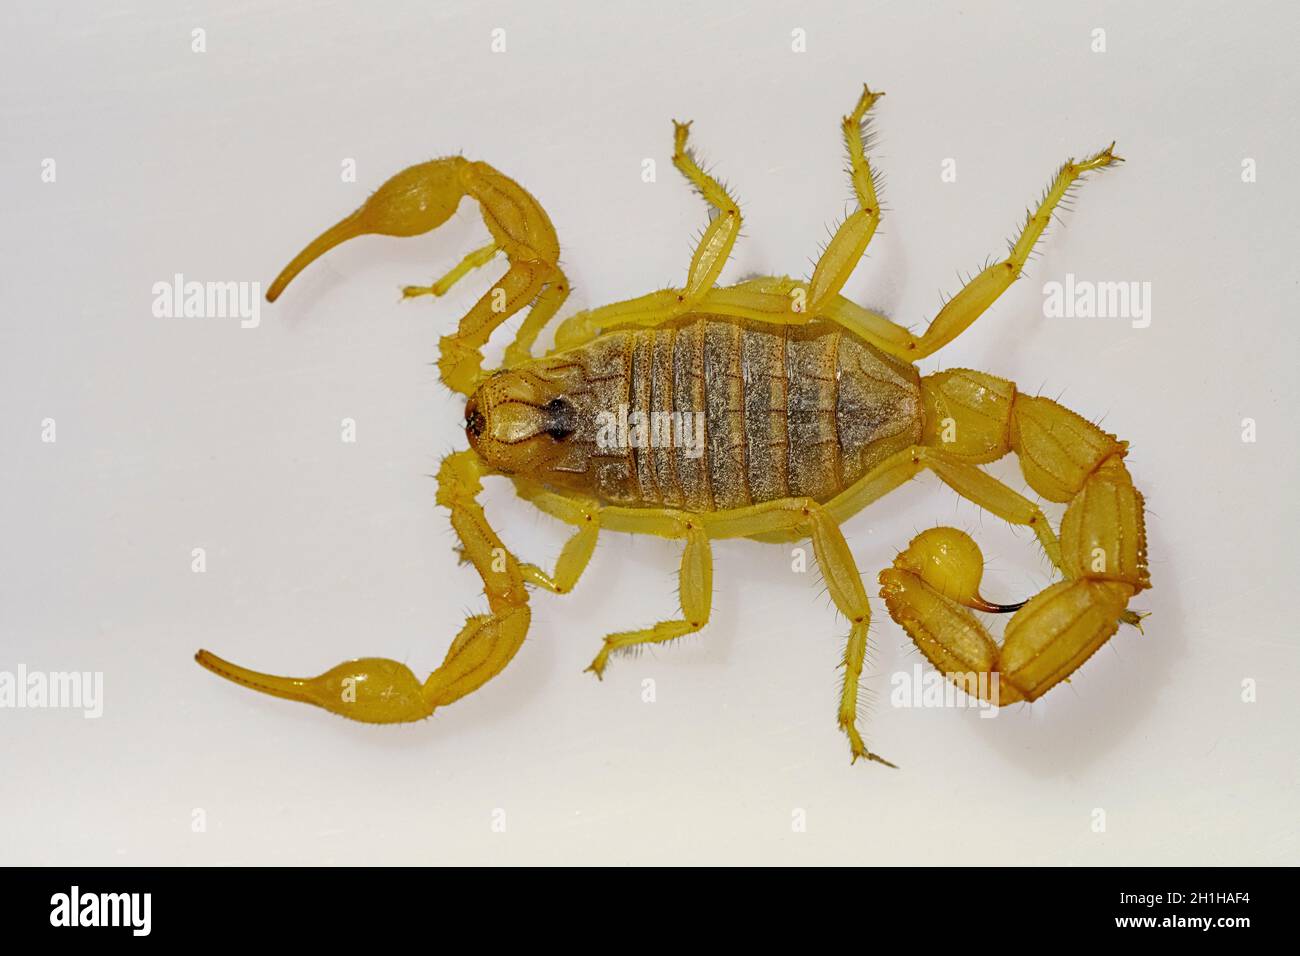 Buthus montanus. Scorpion isolated on a white background Stock Photo